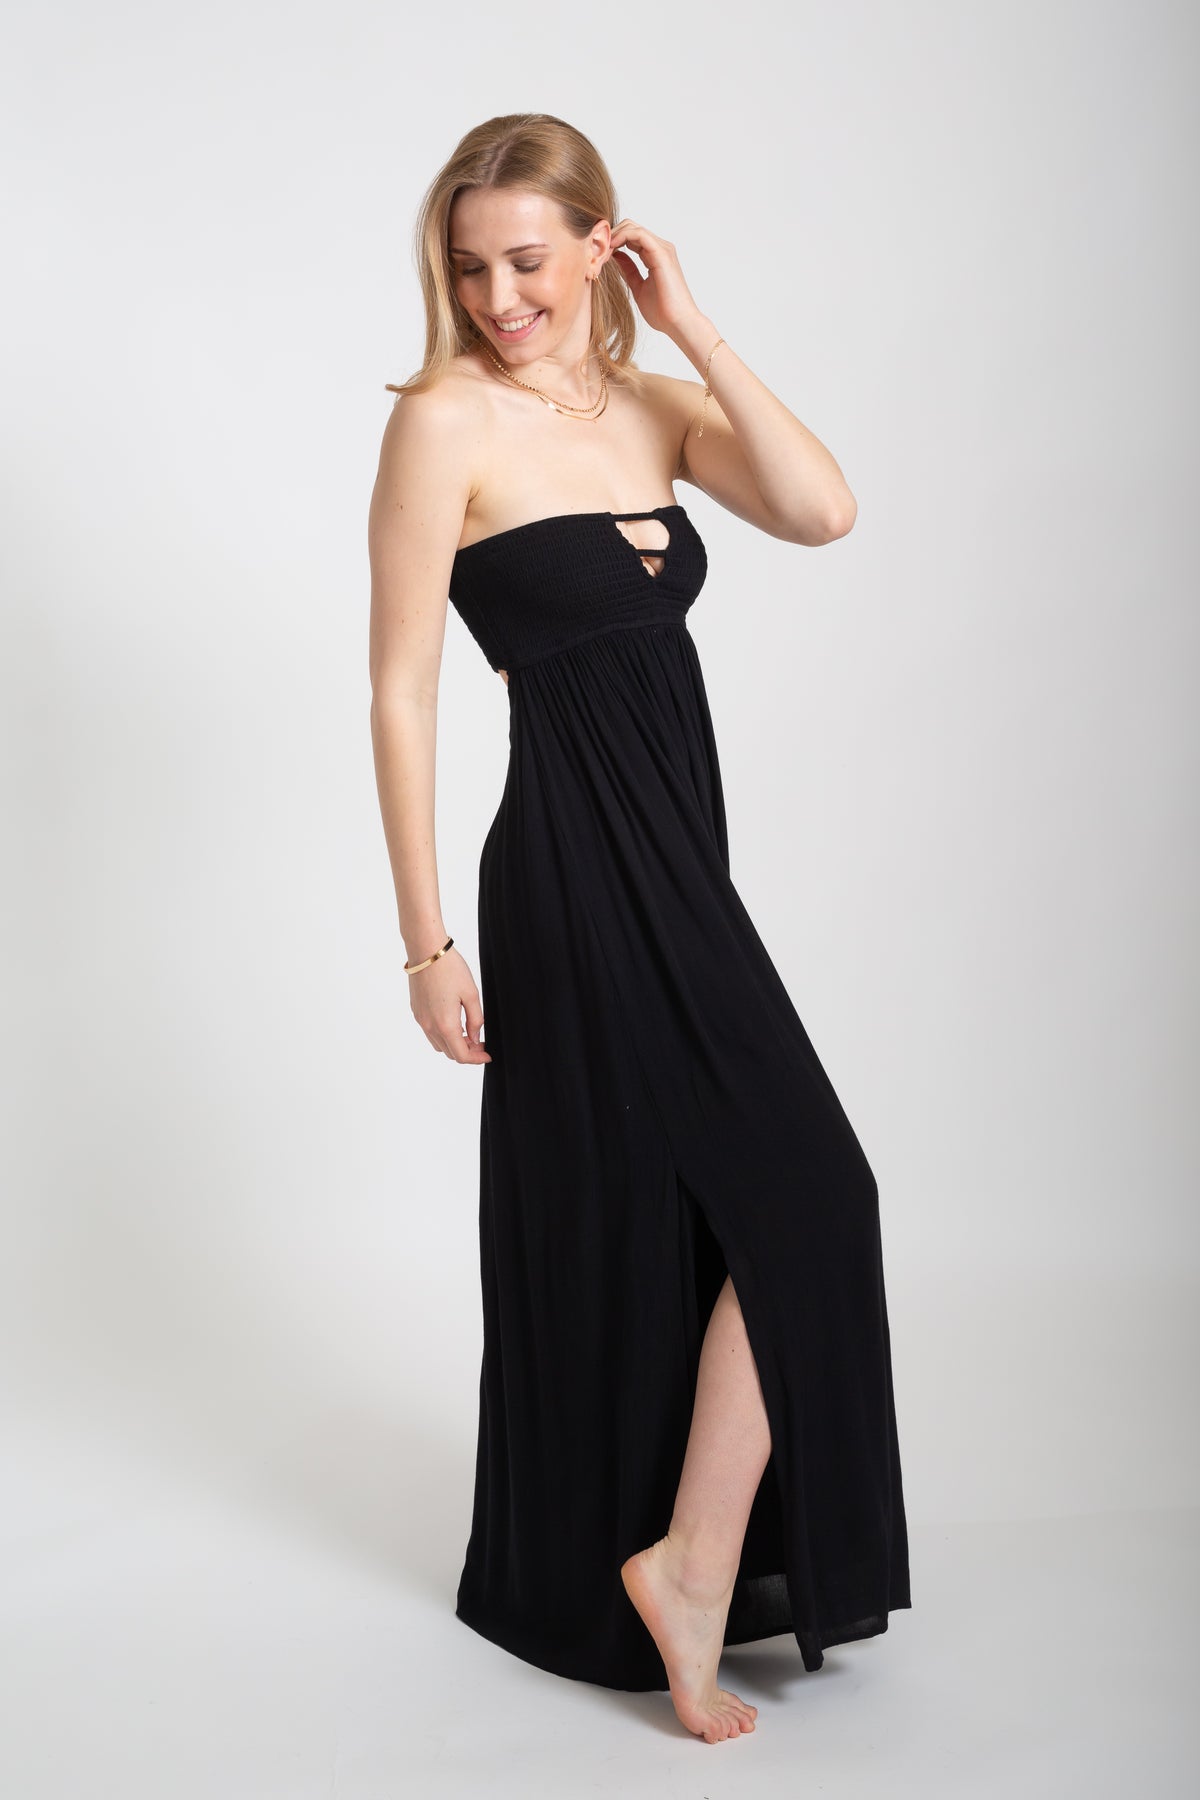 Blonde model wearing the black Miami maxi bandeau dress with the slit by Koy Resort Beachwear collection facing side.